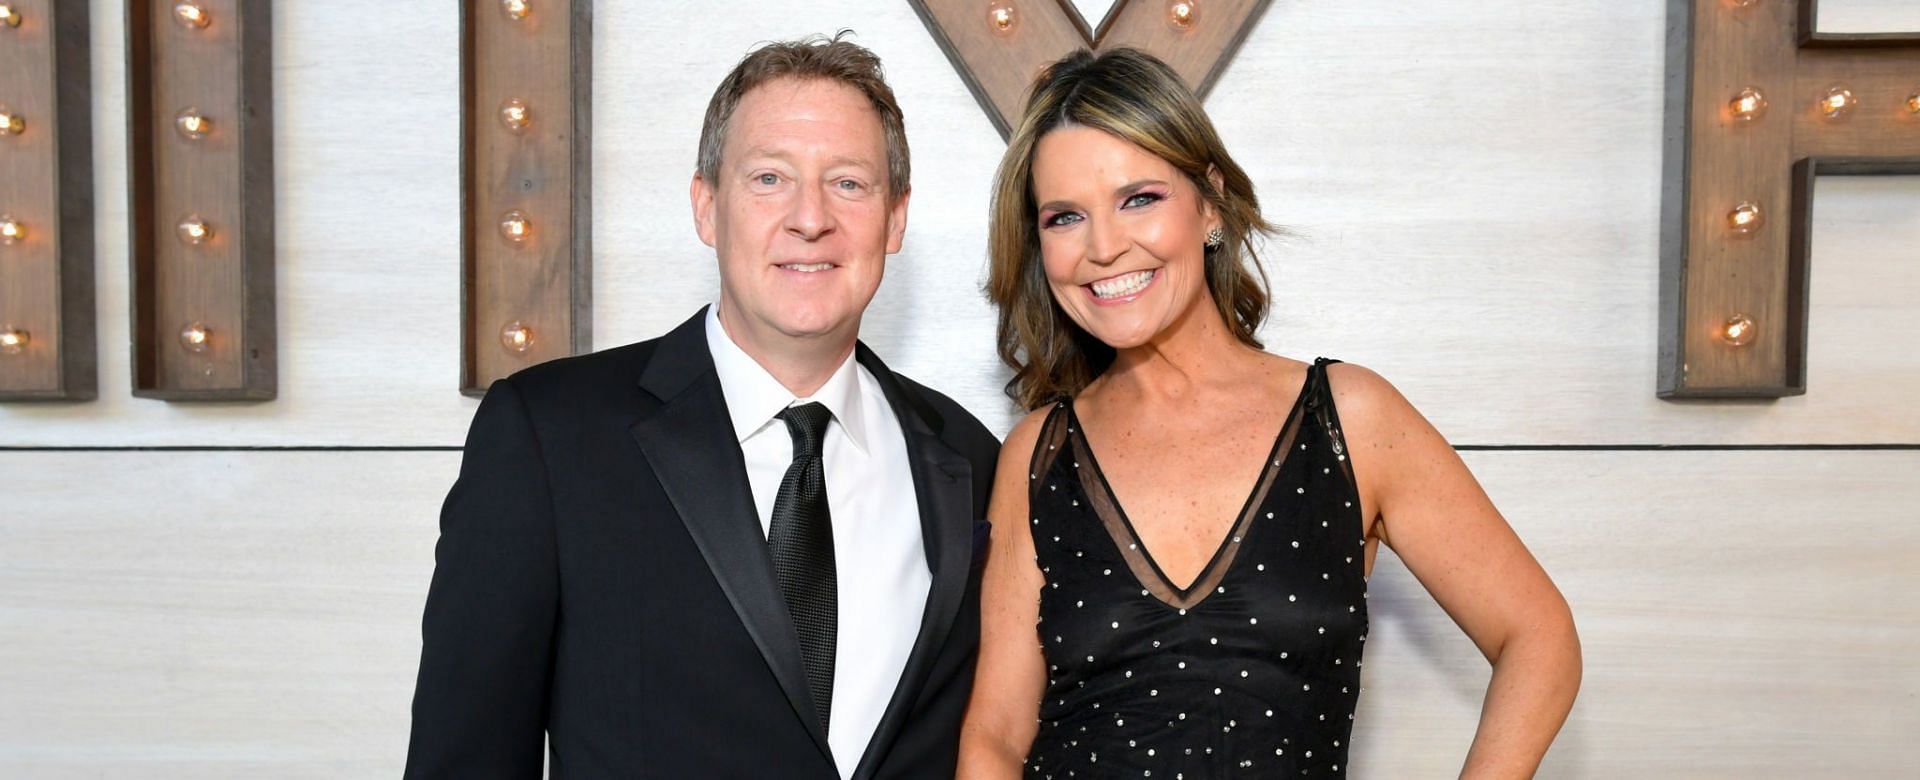 Michael Feldman and Savannah Guthrie tied the knot in 2014 (Image via Getty Images)